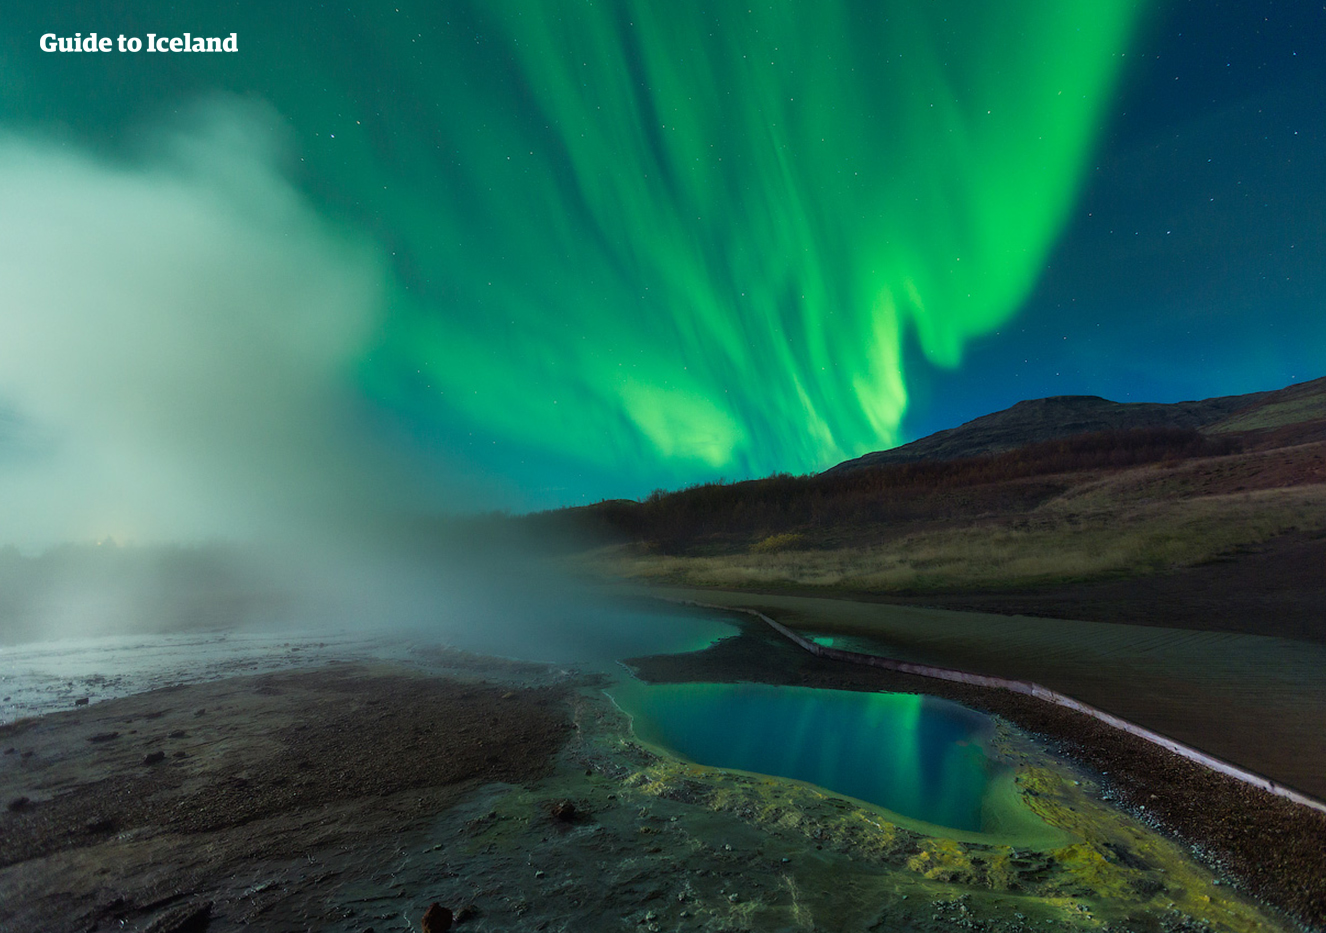 The shorter daylight hours will give you plenty of time to hunt for the Northern Lights